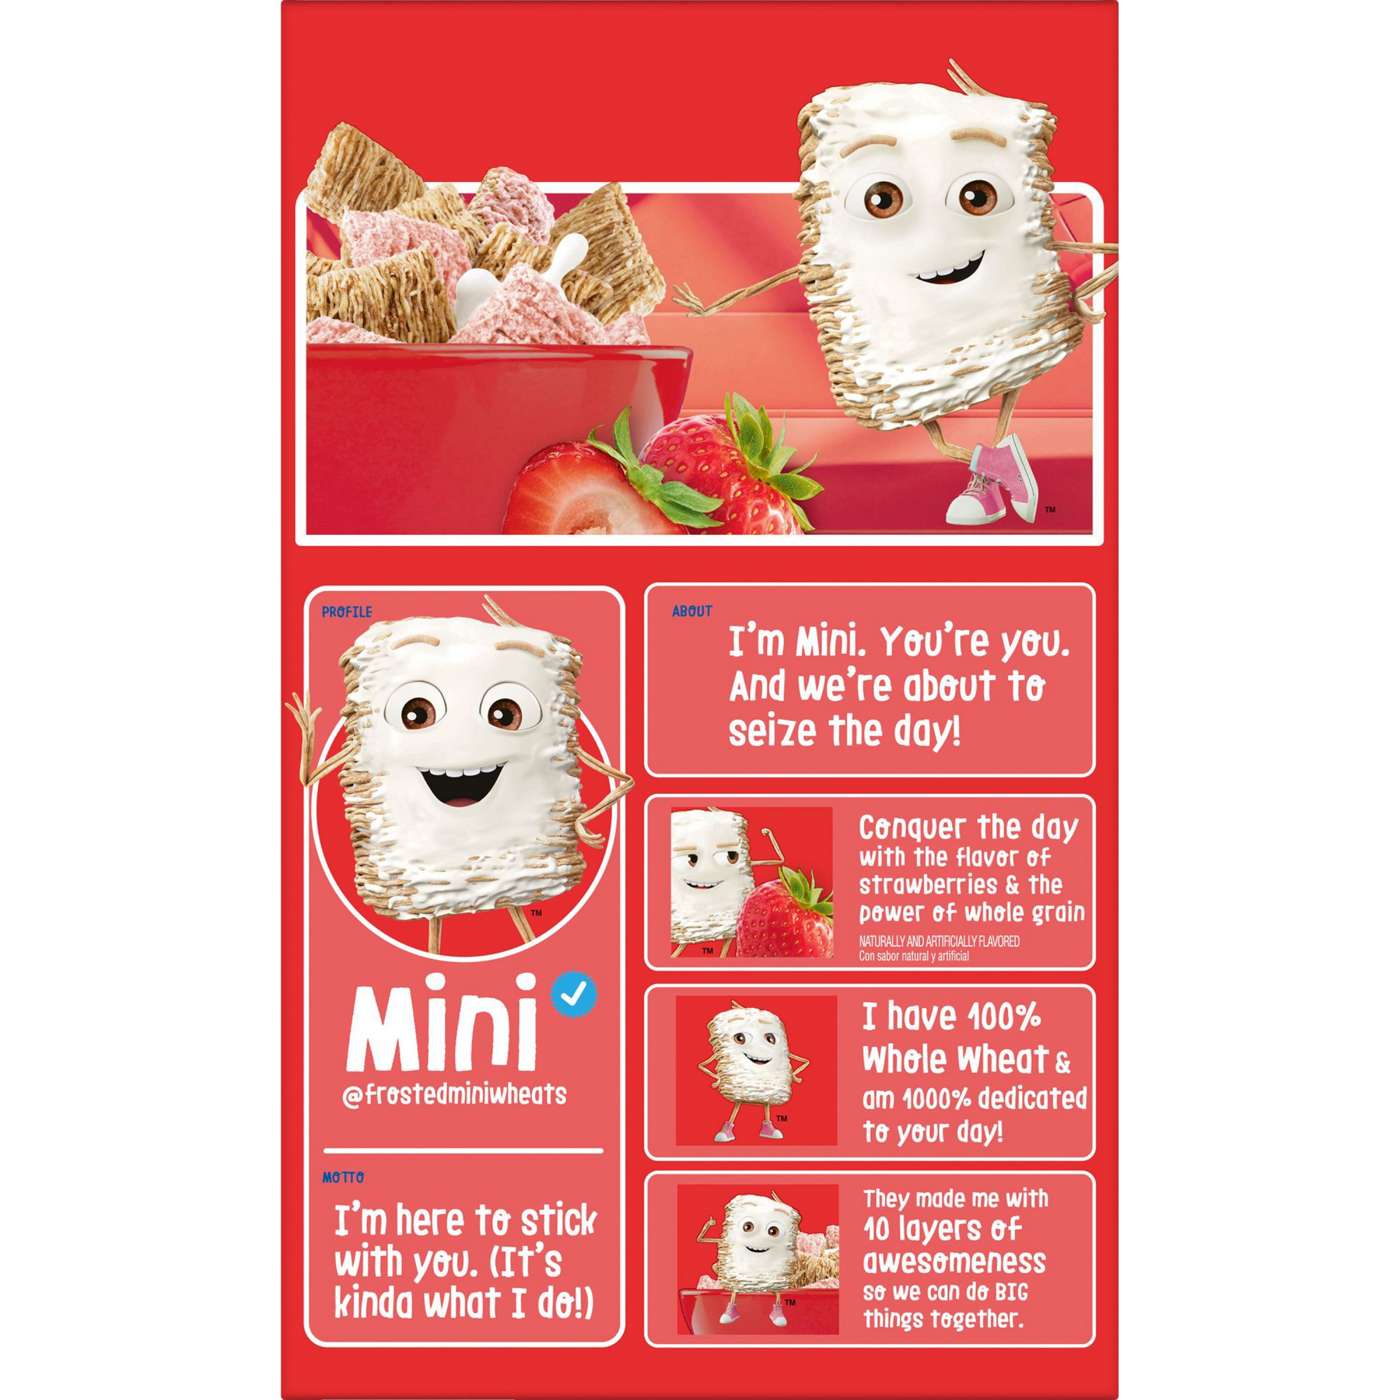 Kellogg's Frosted Mini-Wheats Strawberry Cold Breakfast Cereal; image 3 of 5